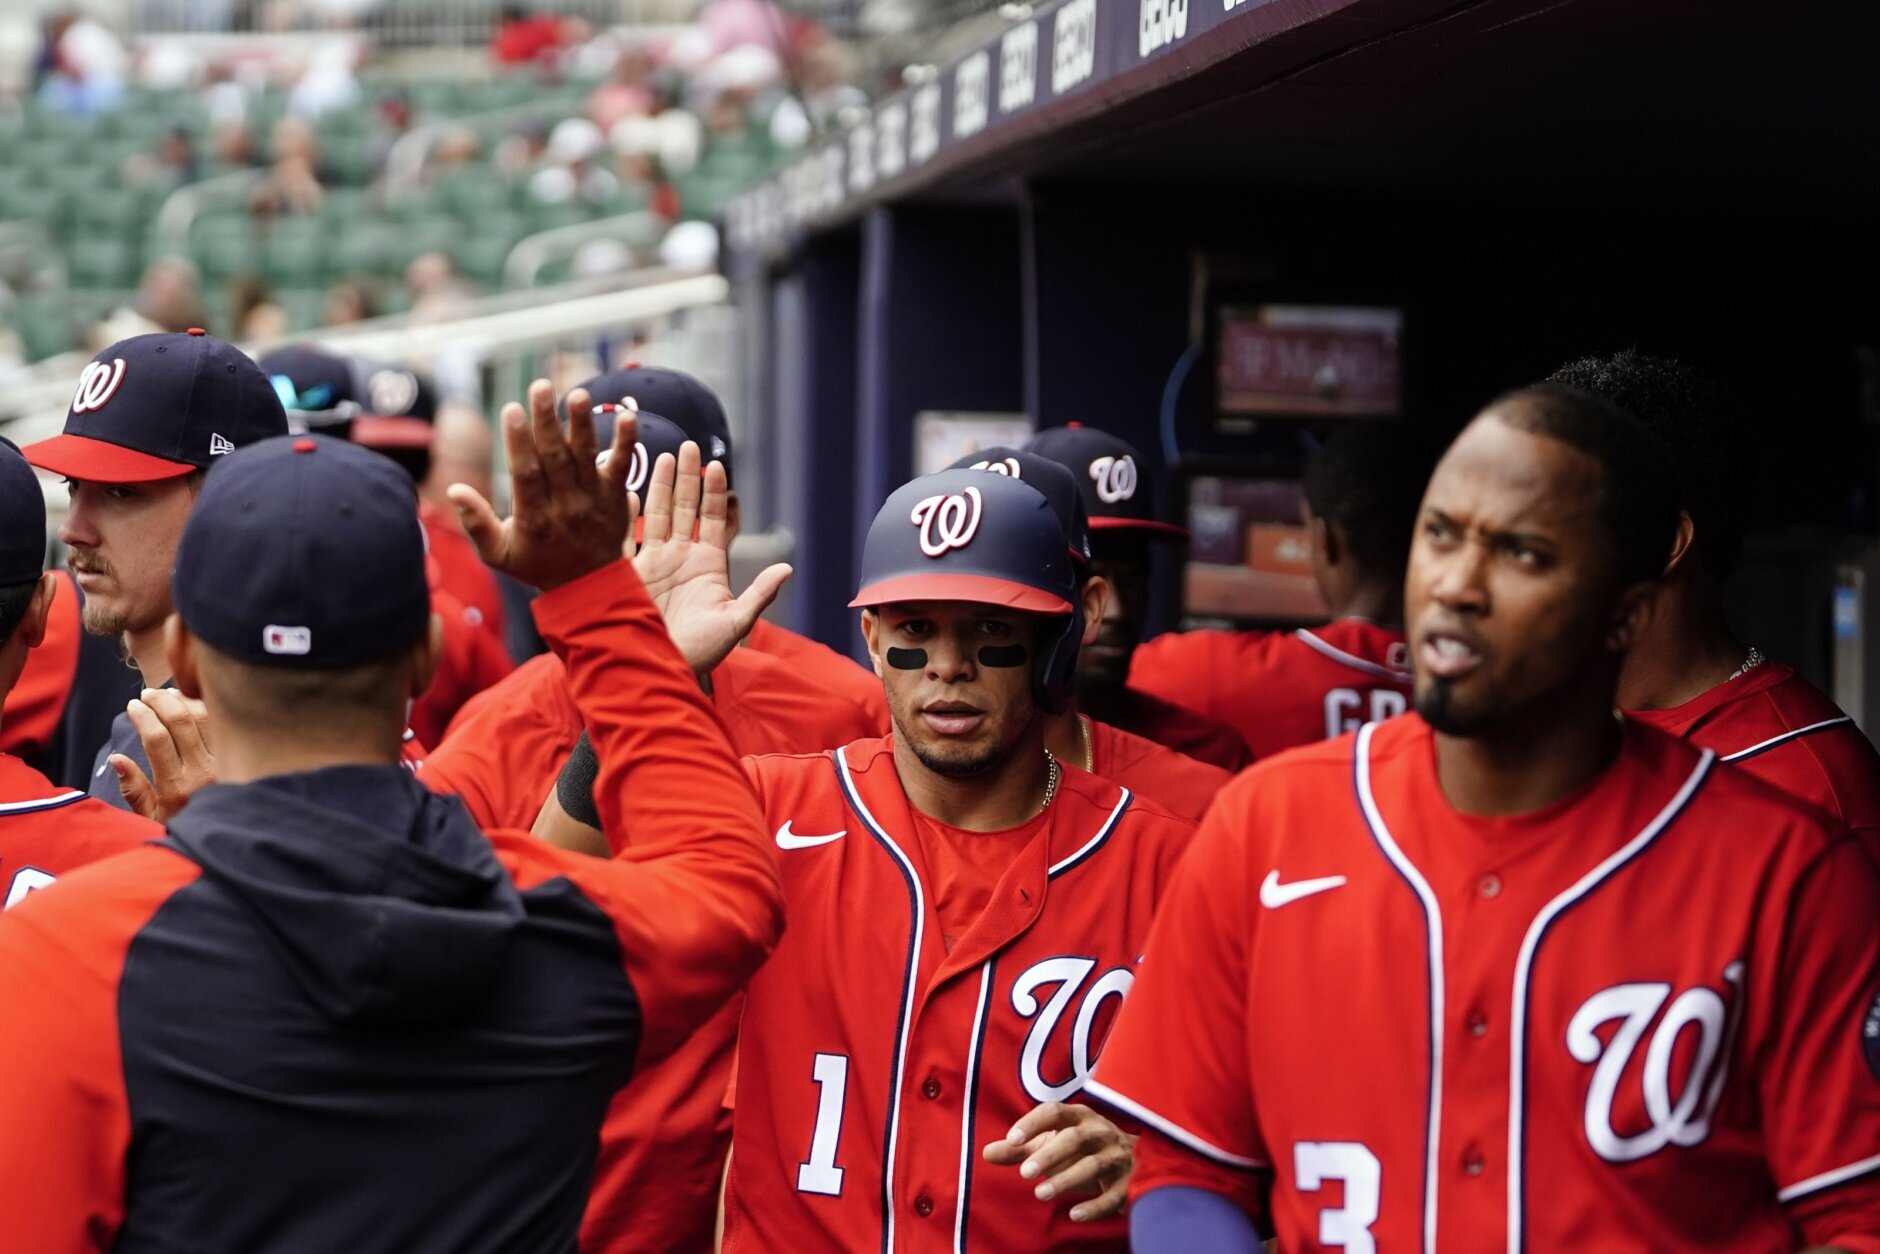 Soto youngest to steal 3 bases, Nats beat Braves 7-1 - WTOP News